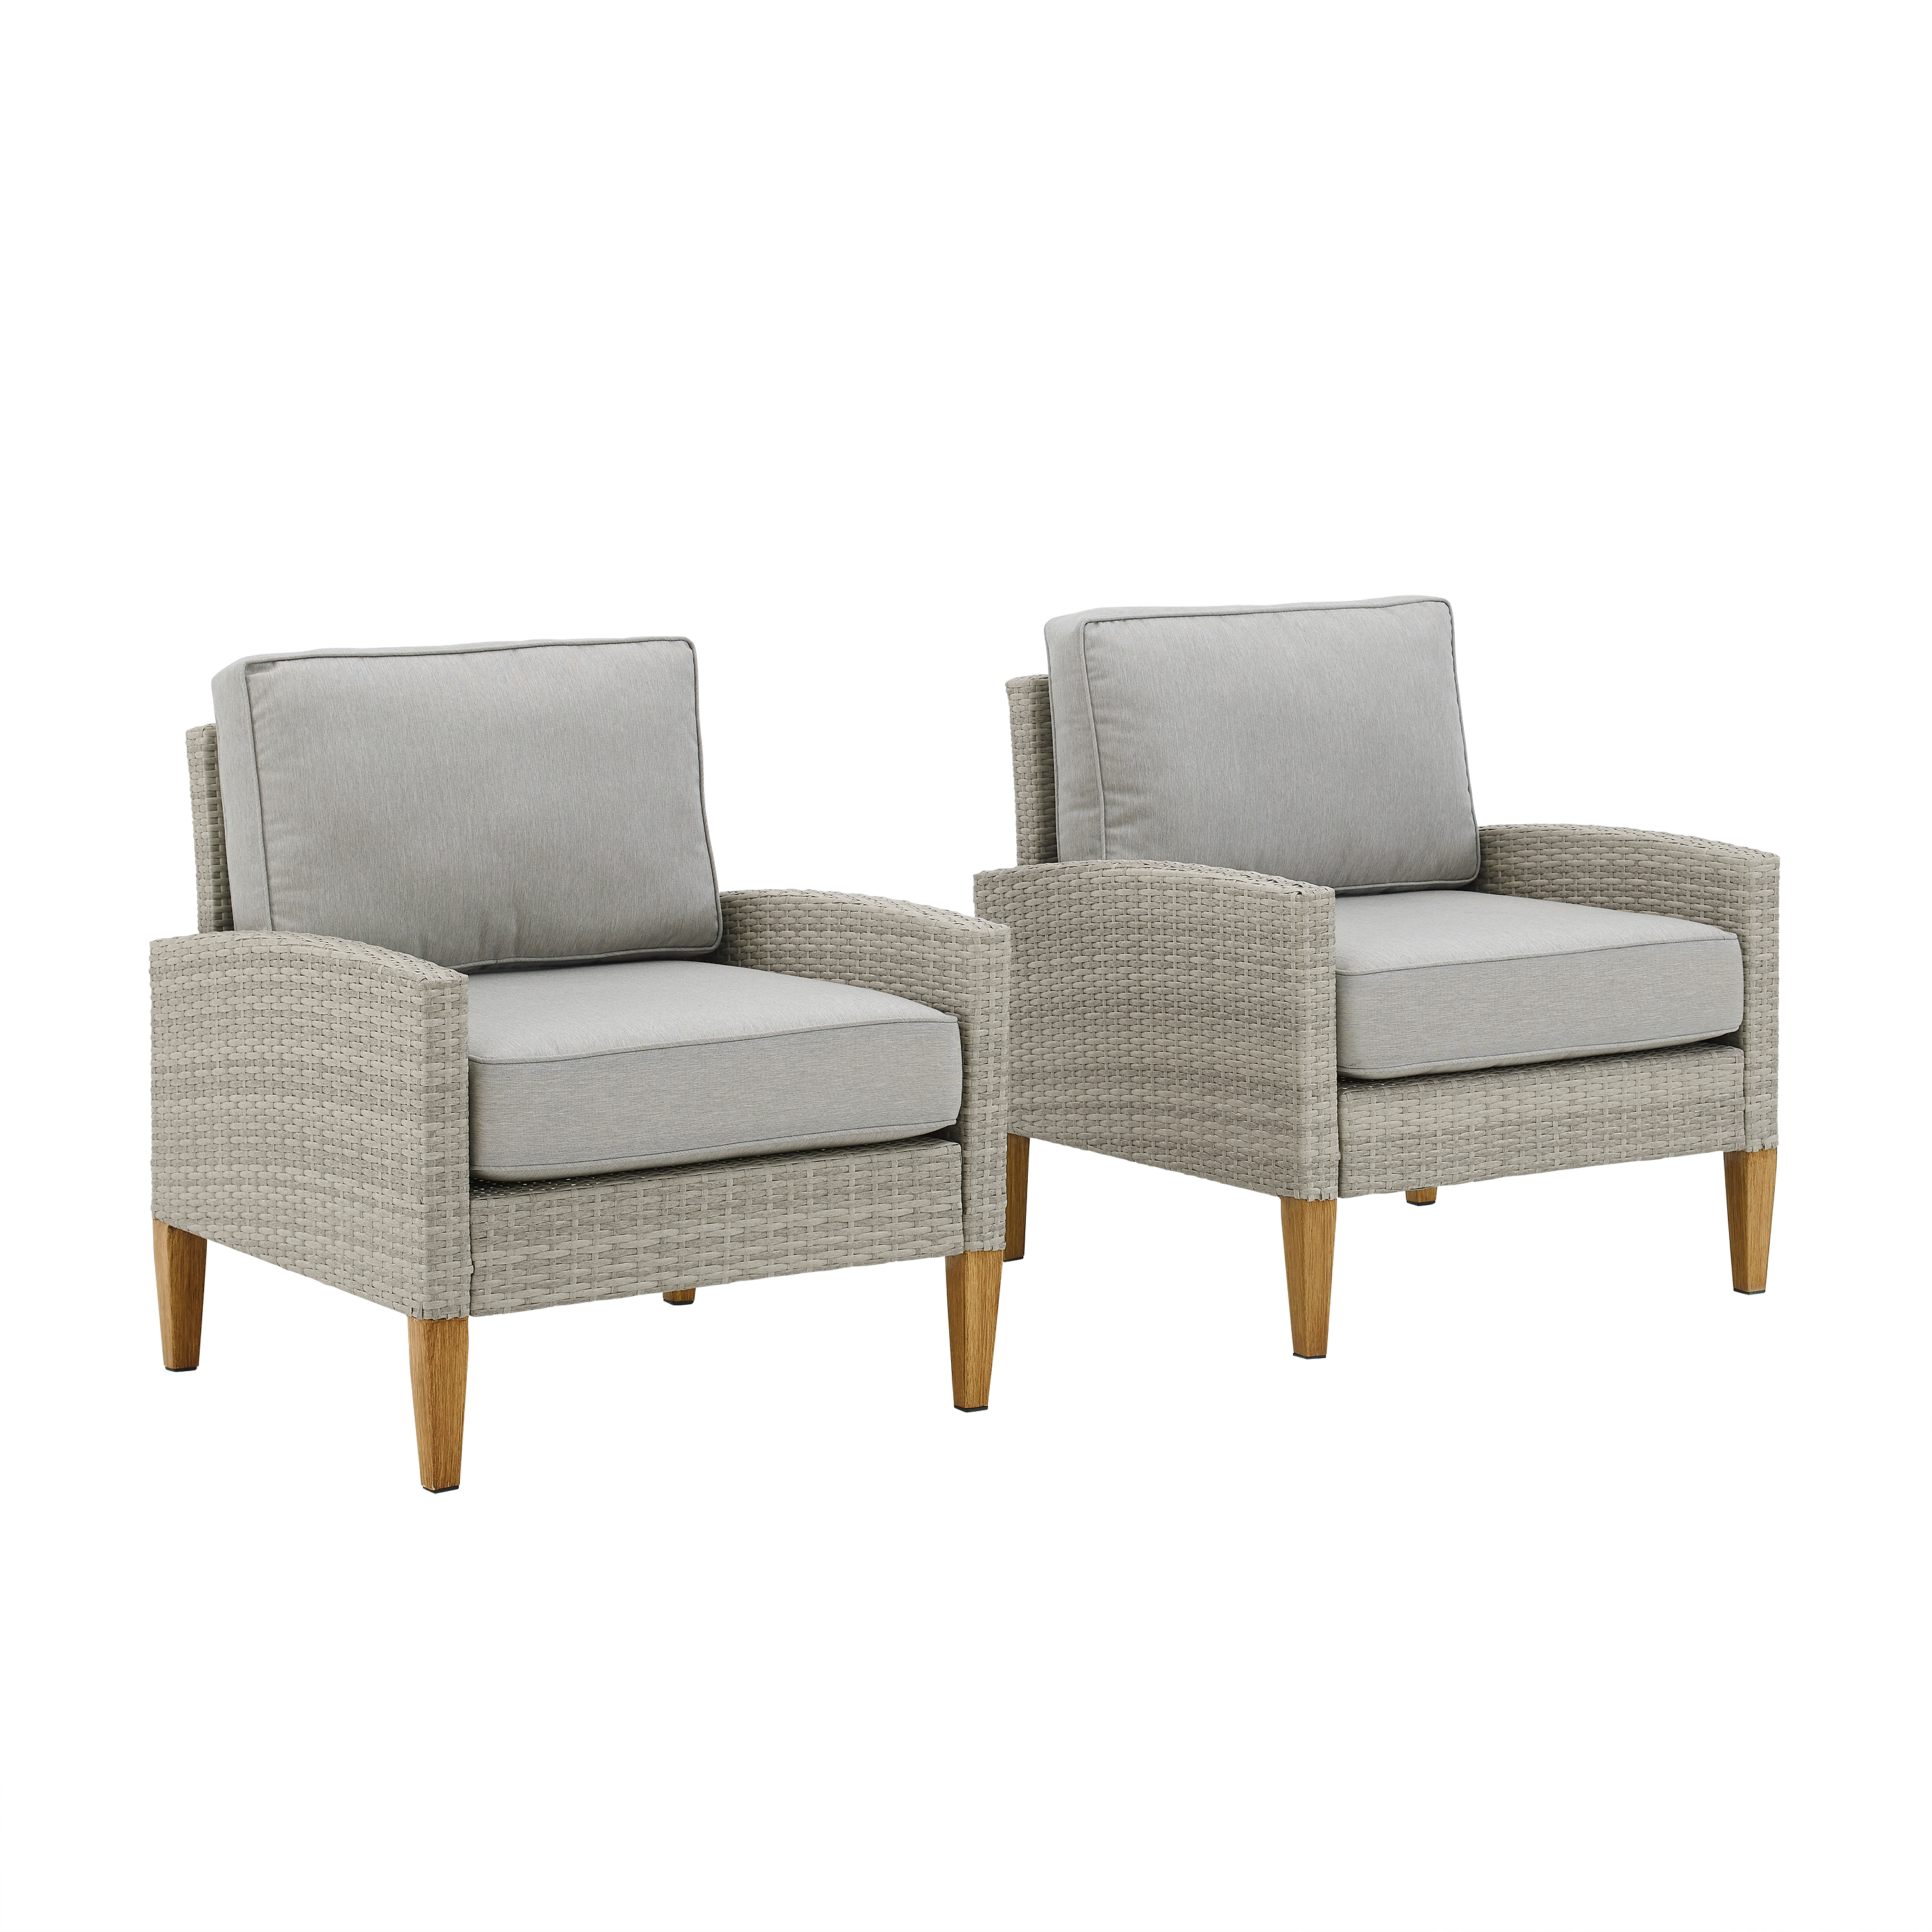 Crosley Furniture Capella Outdoor Wicker 2 Piece Chair Set- 2 Chairs - image 1 of 13